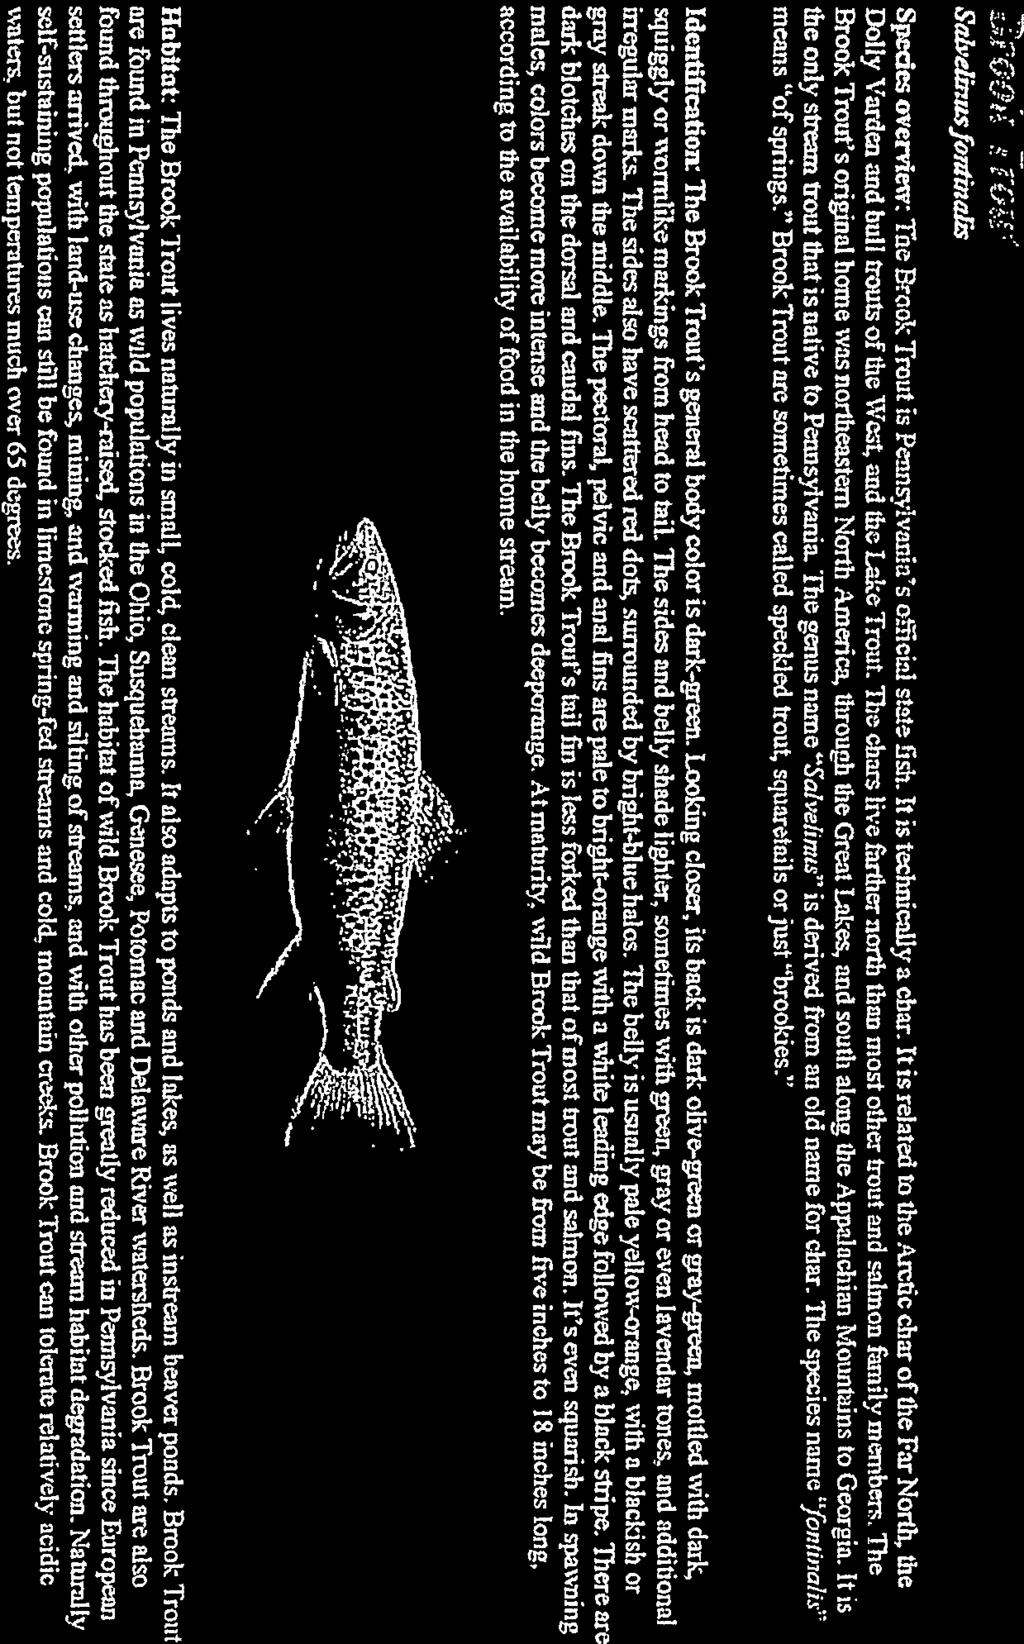 iallery of Pennsylvania Fishes - Chapter 15, Trout and Salmon Page 1 of 1 Sth eliezlrf(rnfhudis Species overviear: The Brag: Treat is tcunskei aiiieui stale It is foelsnicaliv a char.